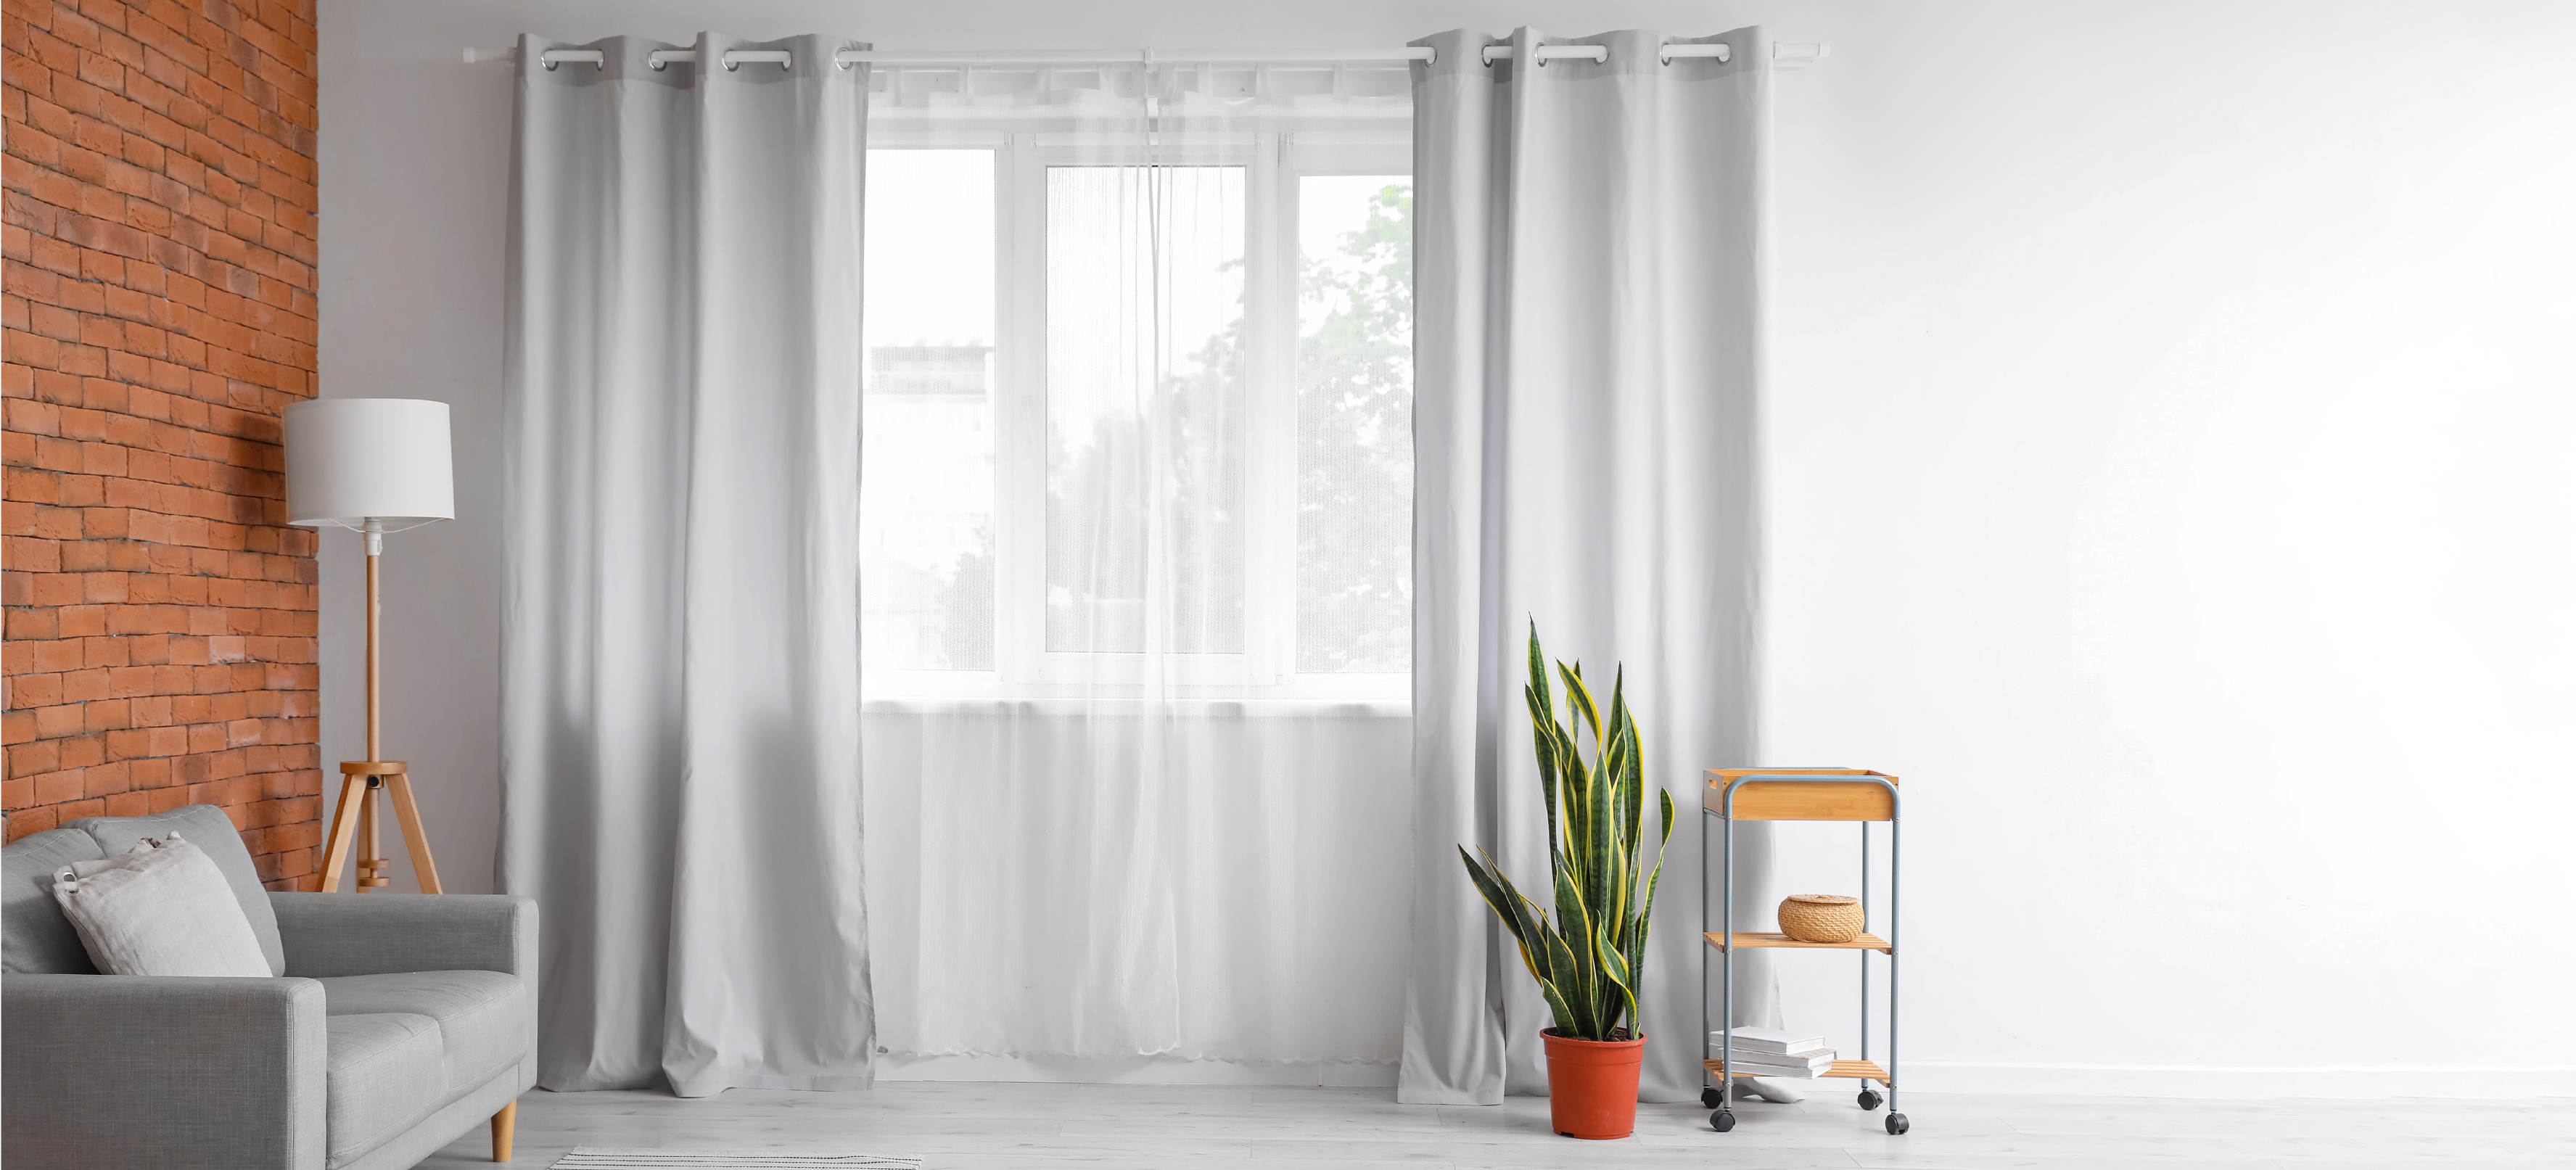 How To Choose Designer Curtains For Your Bedroom Urban Ladder